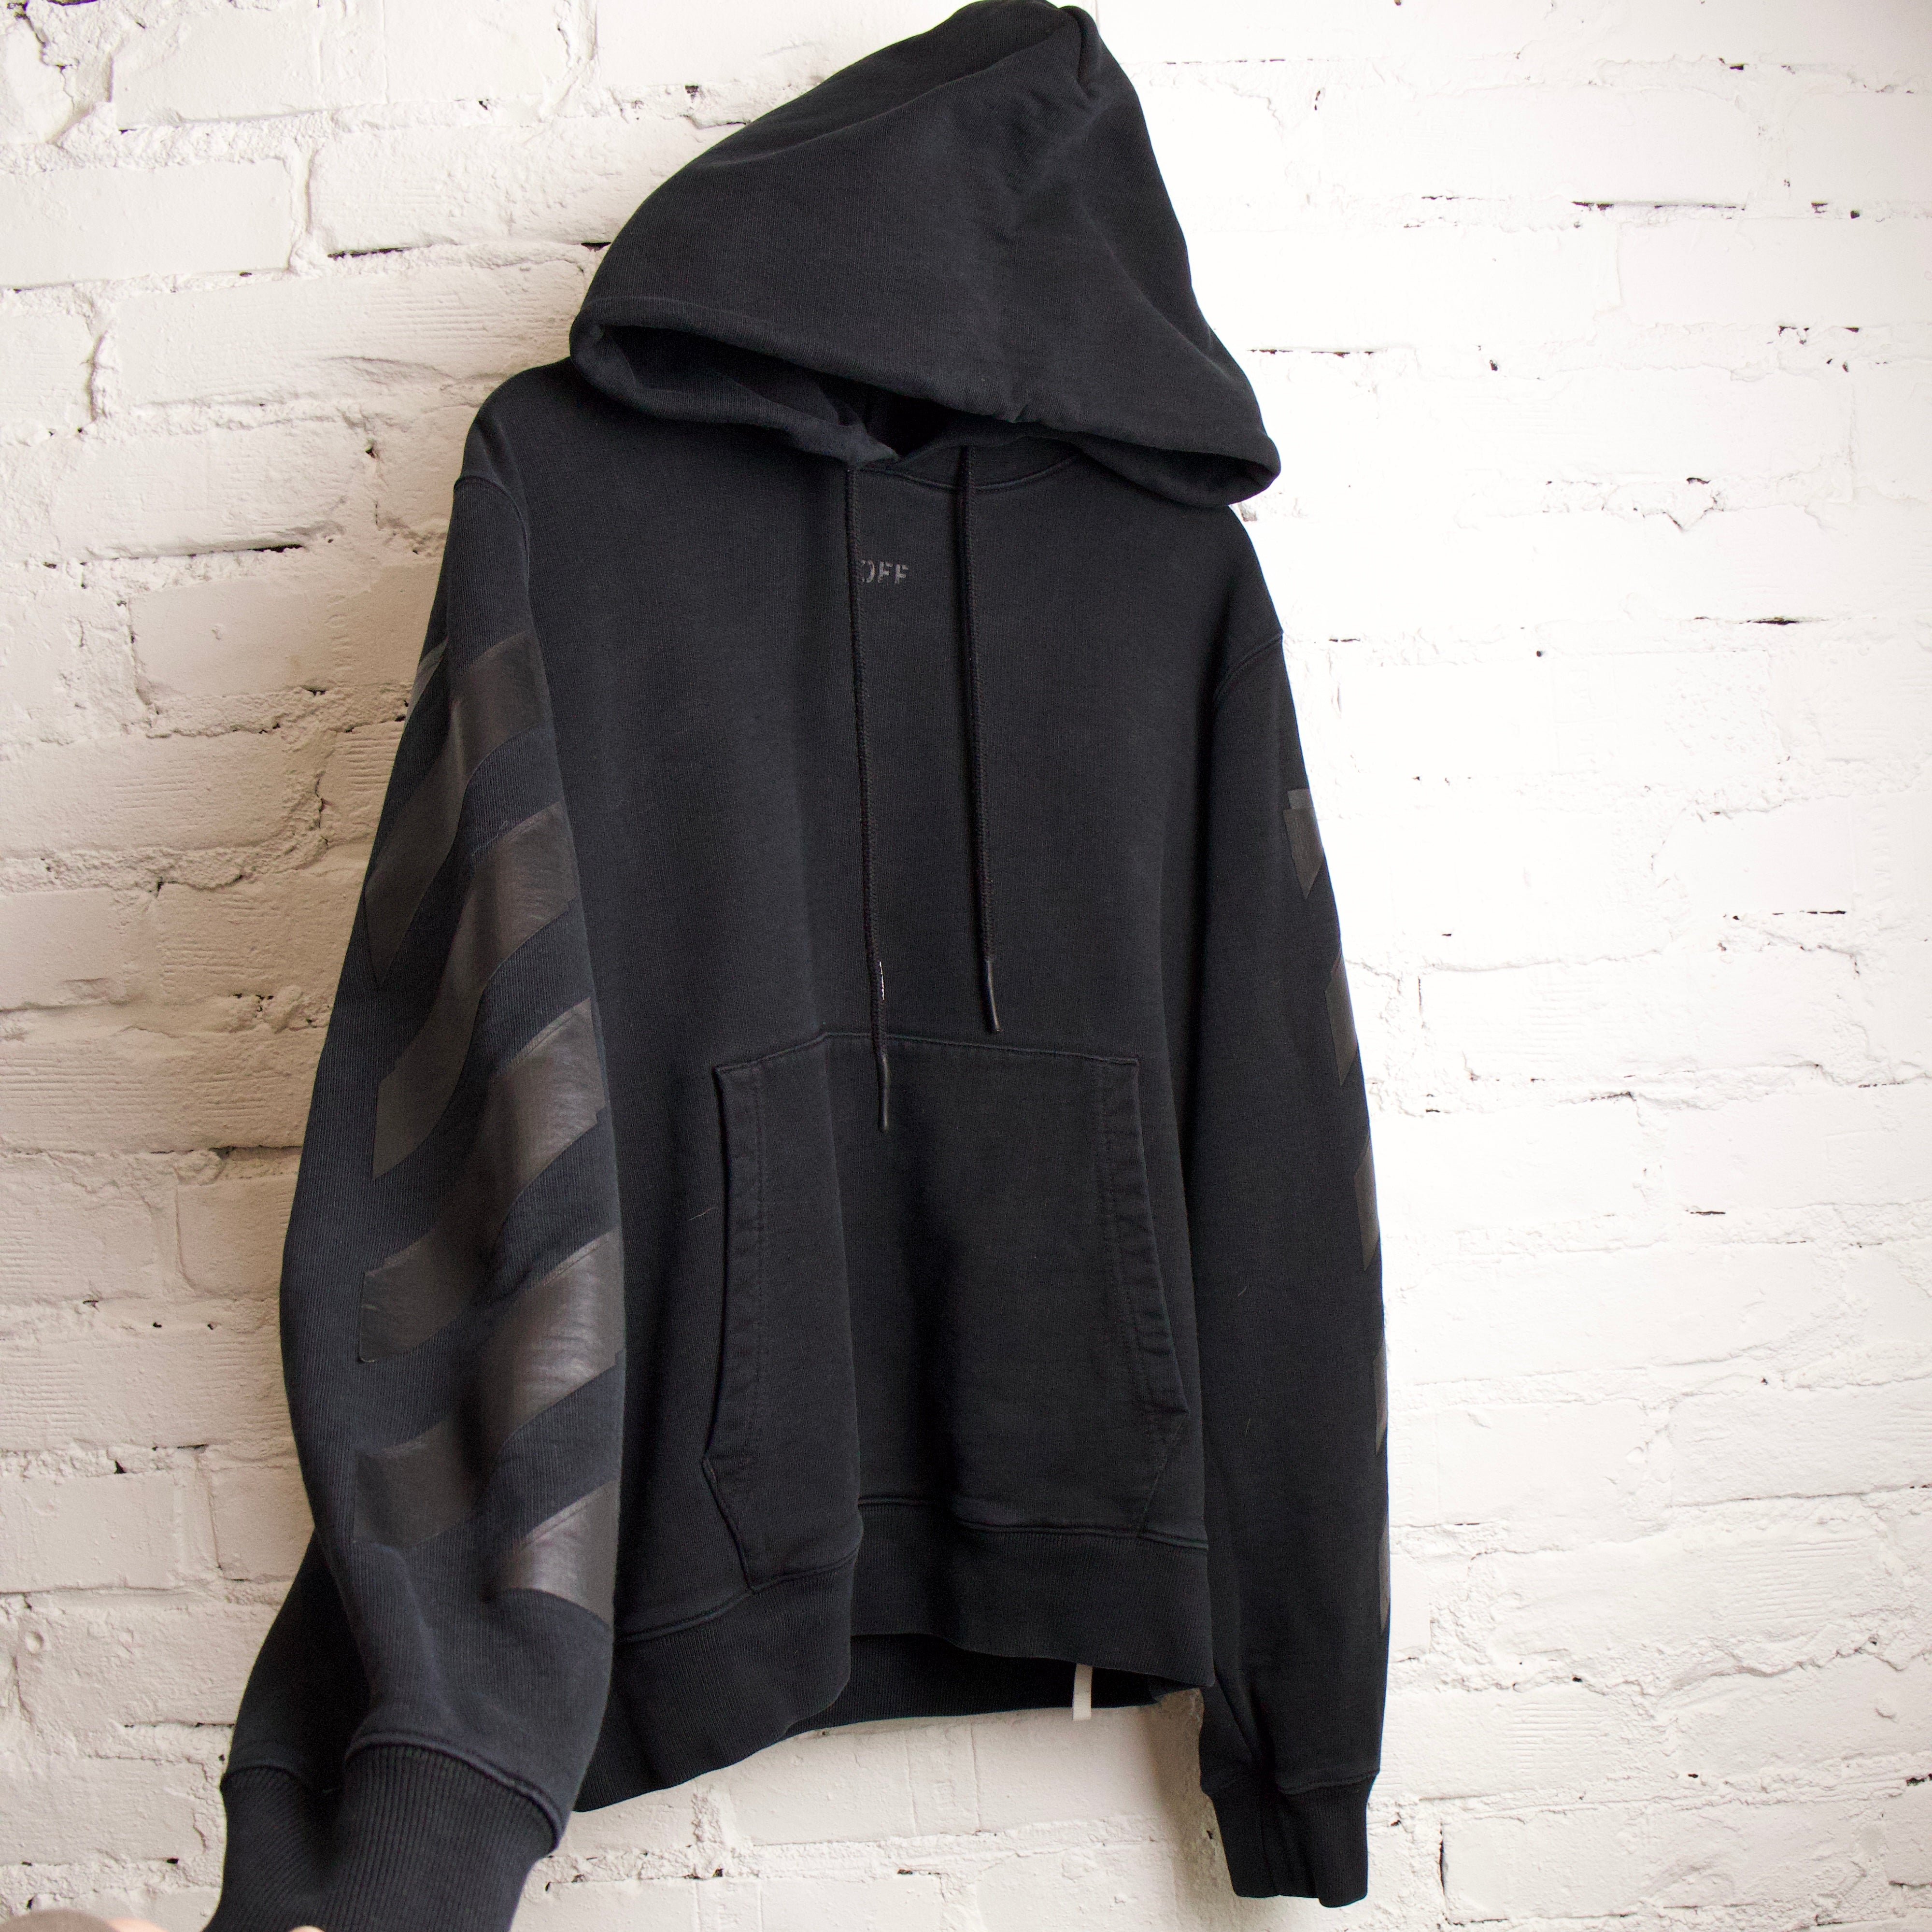 OFF-WHITE Rubber Arrows Cotton Hoodie